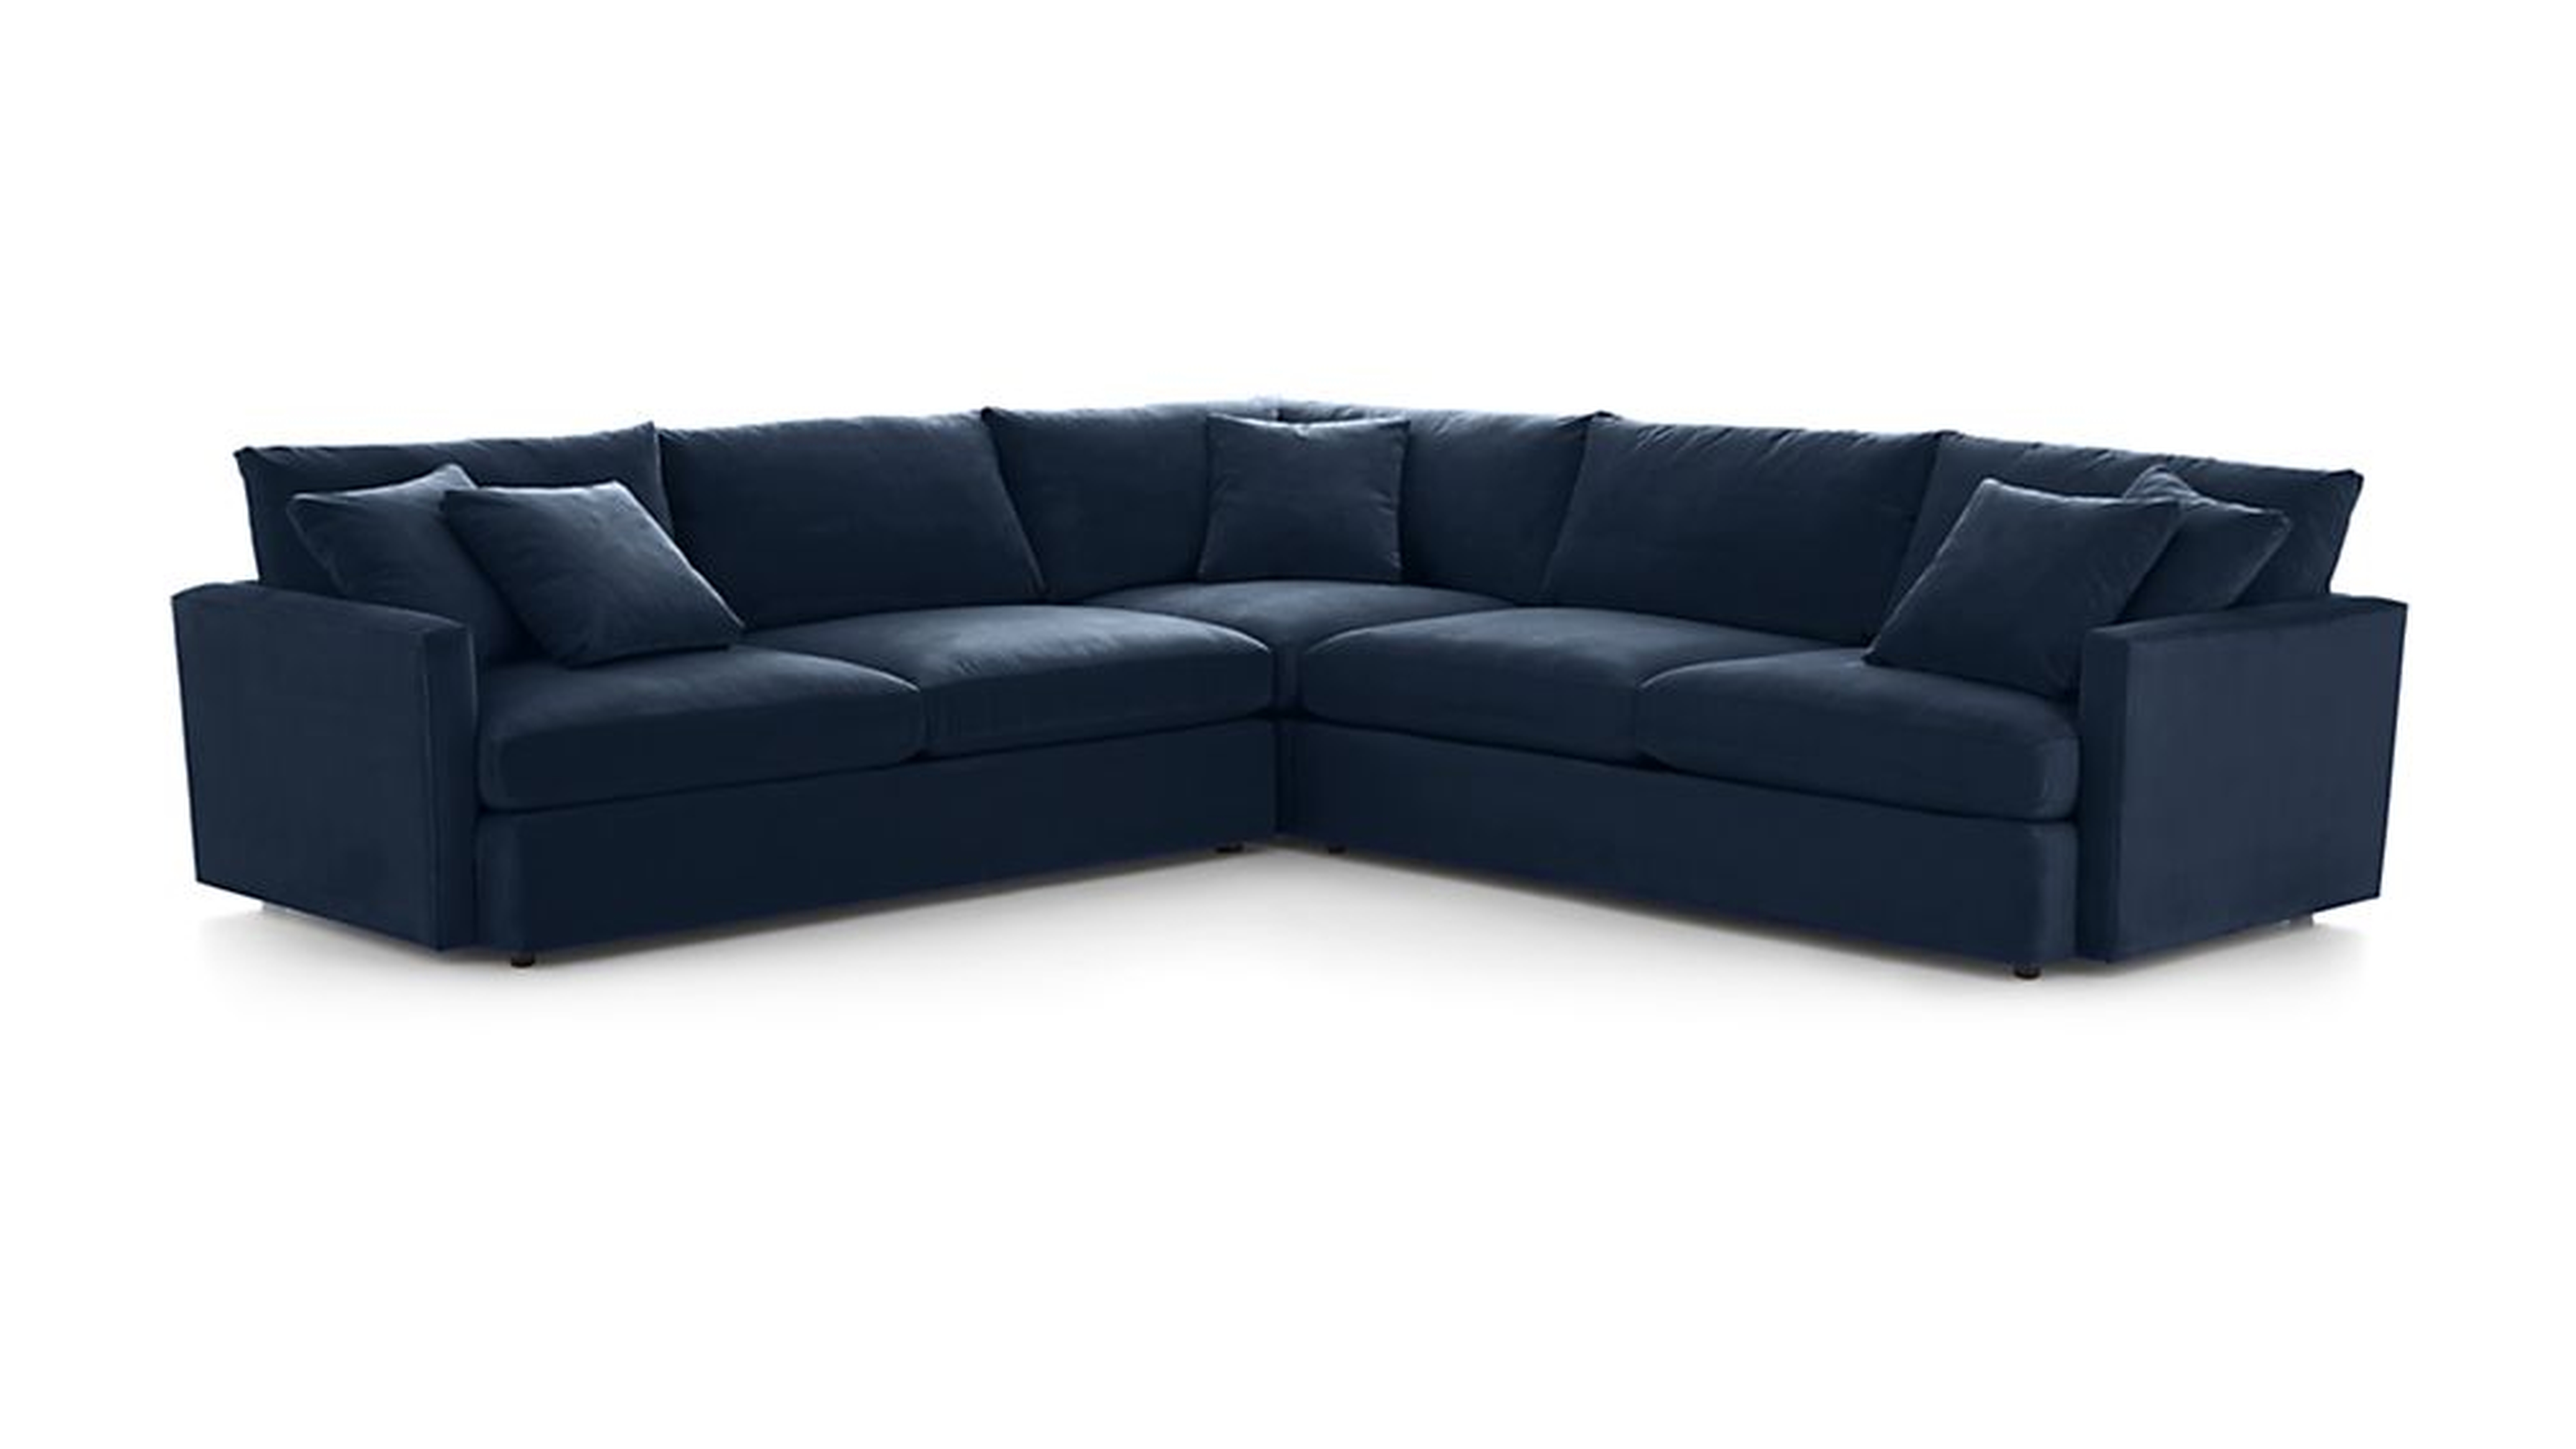 Lounge II 3-Piece Sectional Sofa - Navy - Crate and Barrel